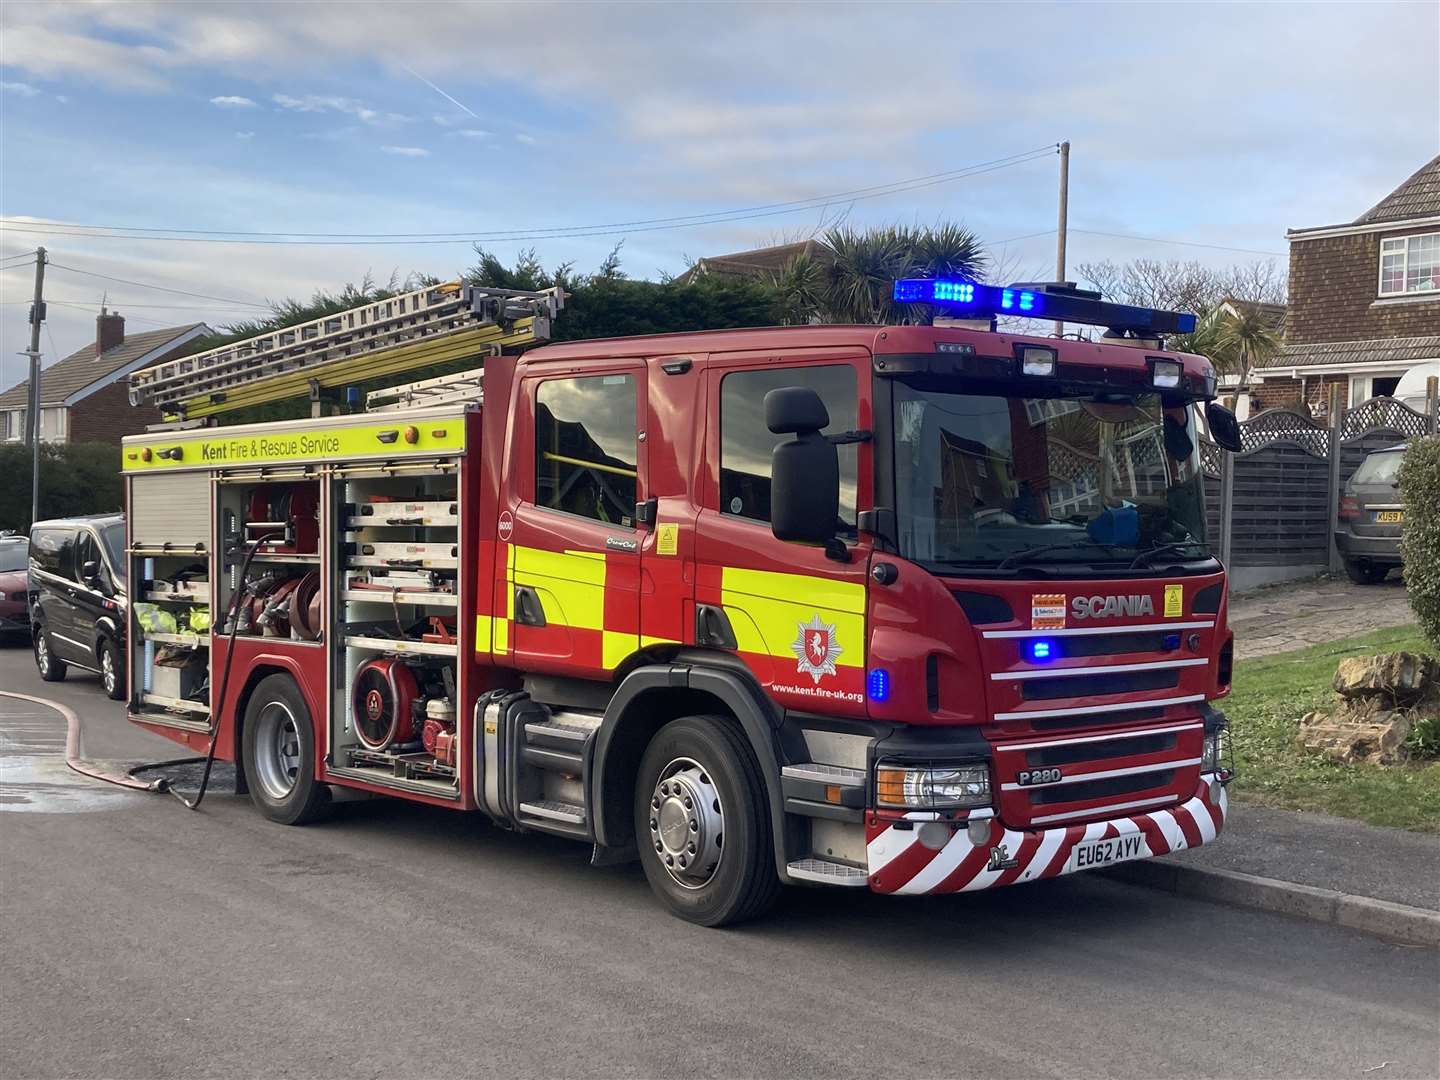 Four fire engines were called to the incident